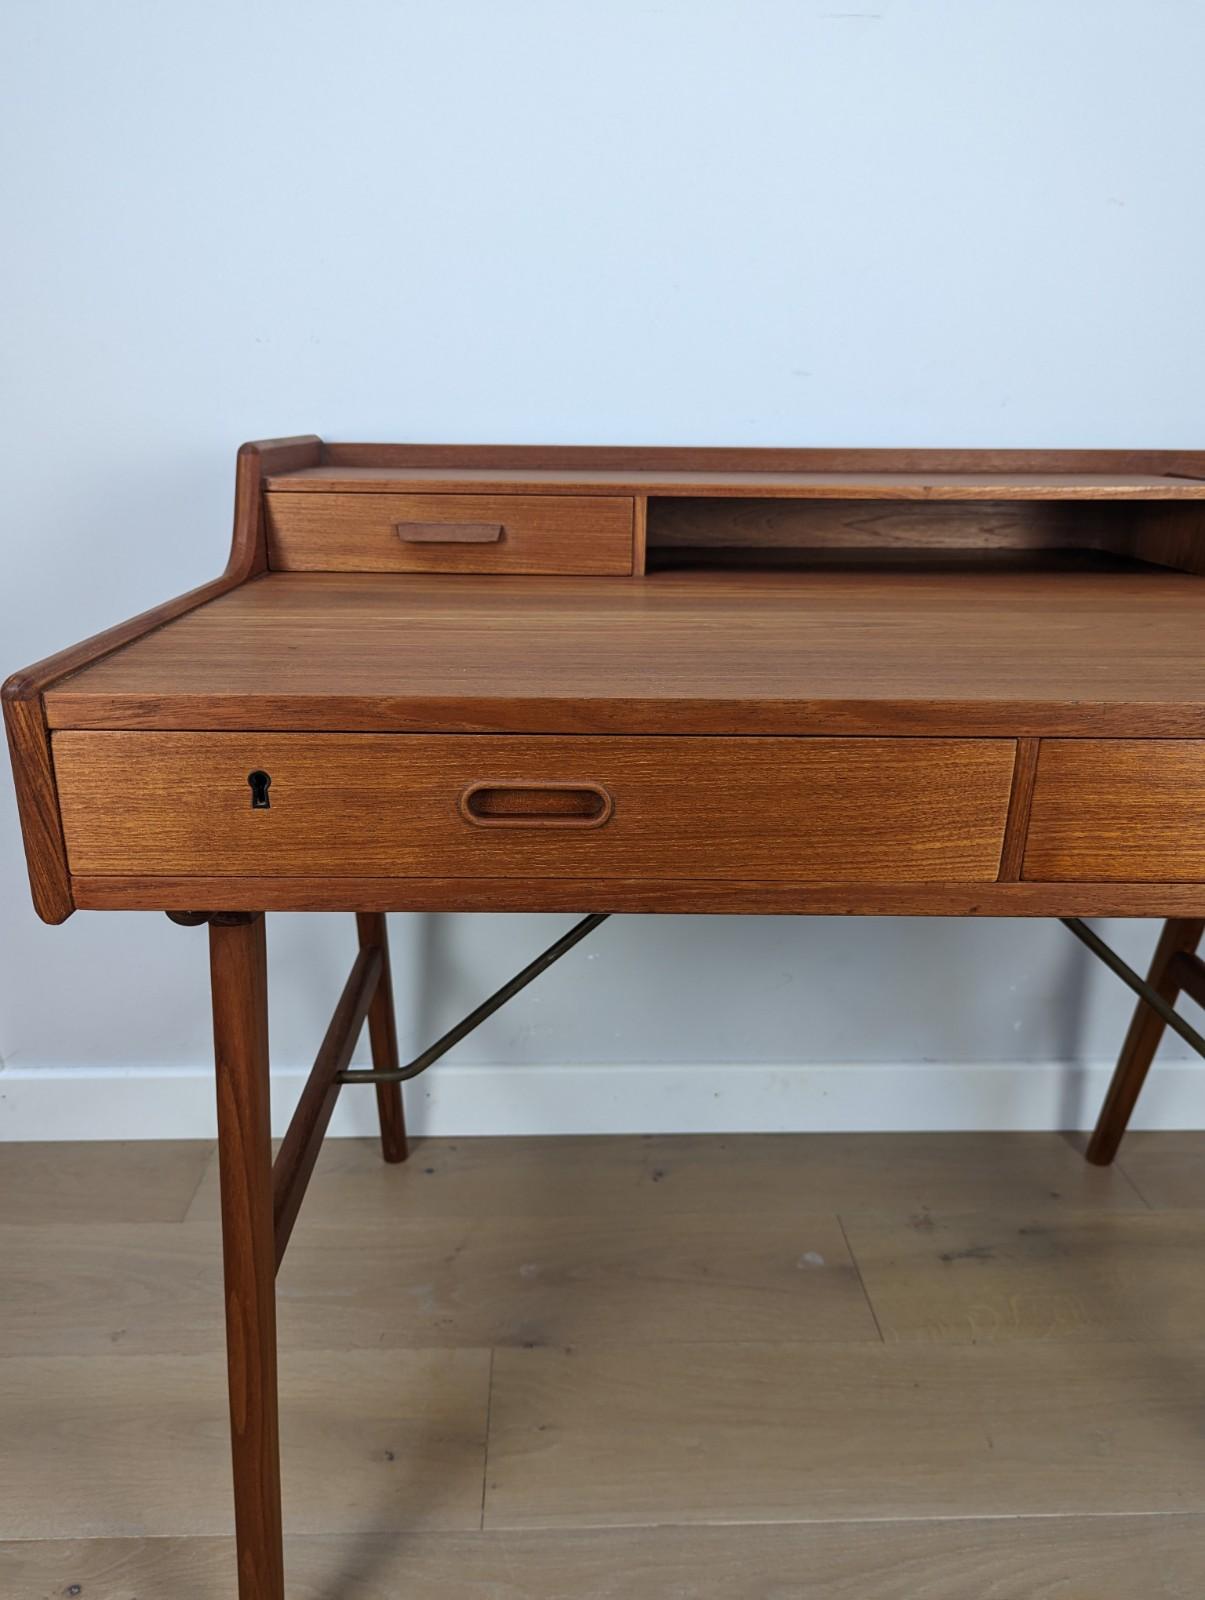 A stunning mid-century Arne Wahl Iversen desk Model 56 for Vinde Møbelfabrik, Denmark.

Made out of Teak with brass leg supports.

This two-tiered desk features splayed legs with supporting brass crossbars. It had three drawers and an organised